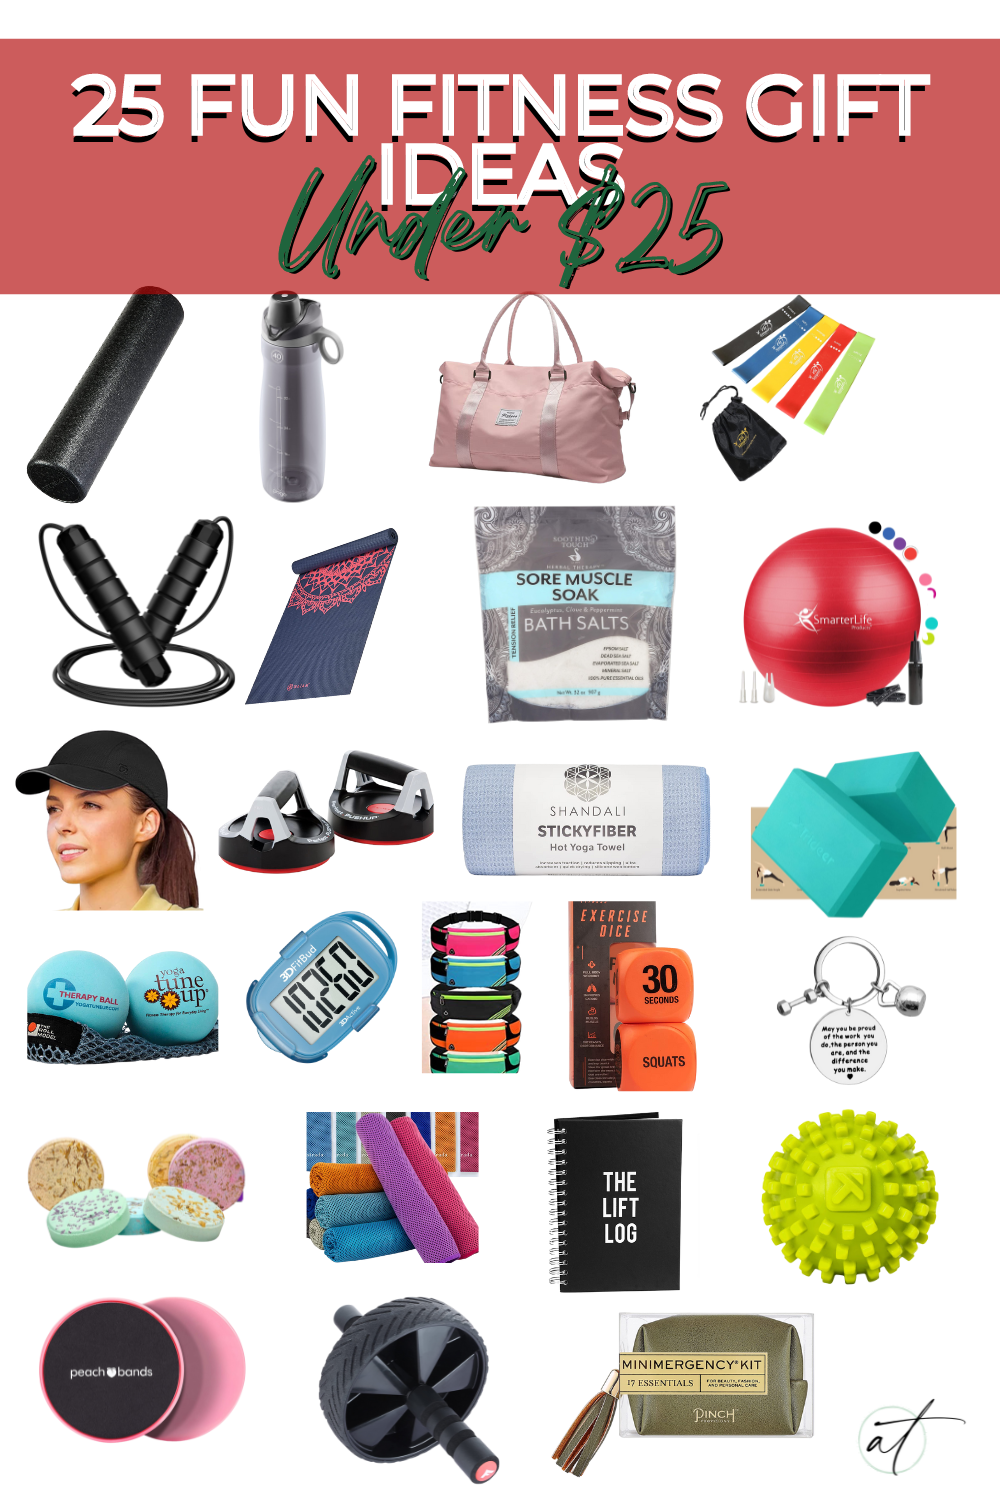 Montague of all the fitness gift ideas under $25 